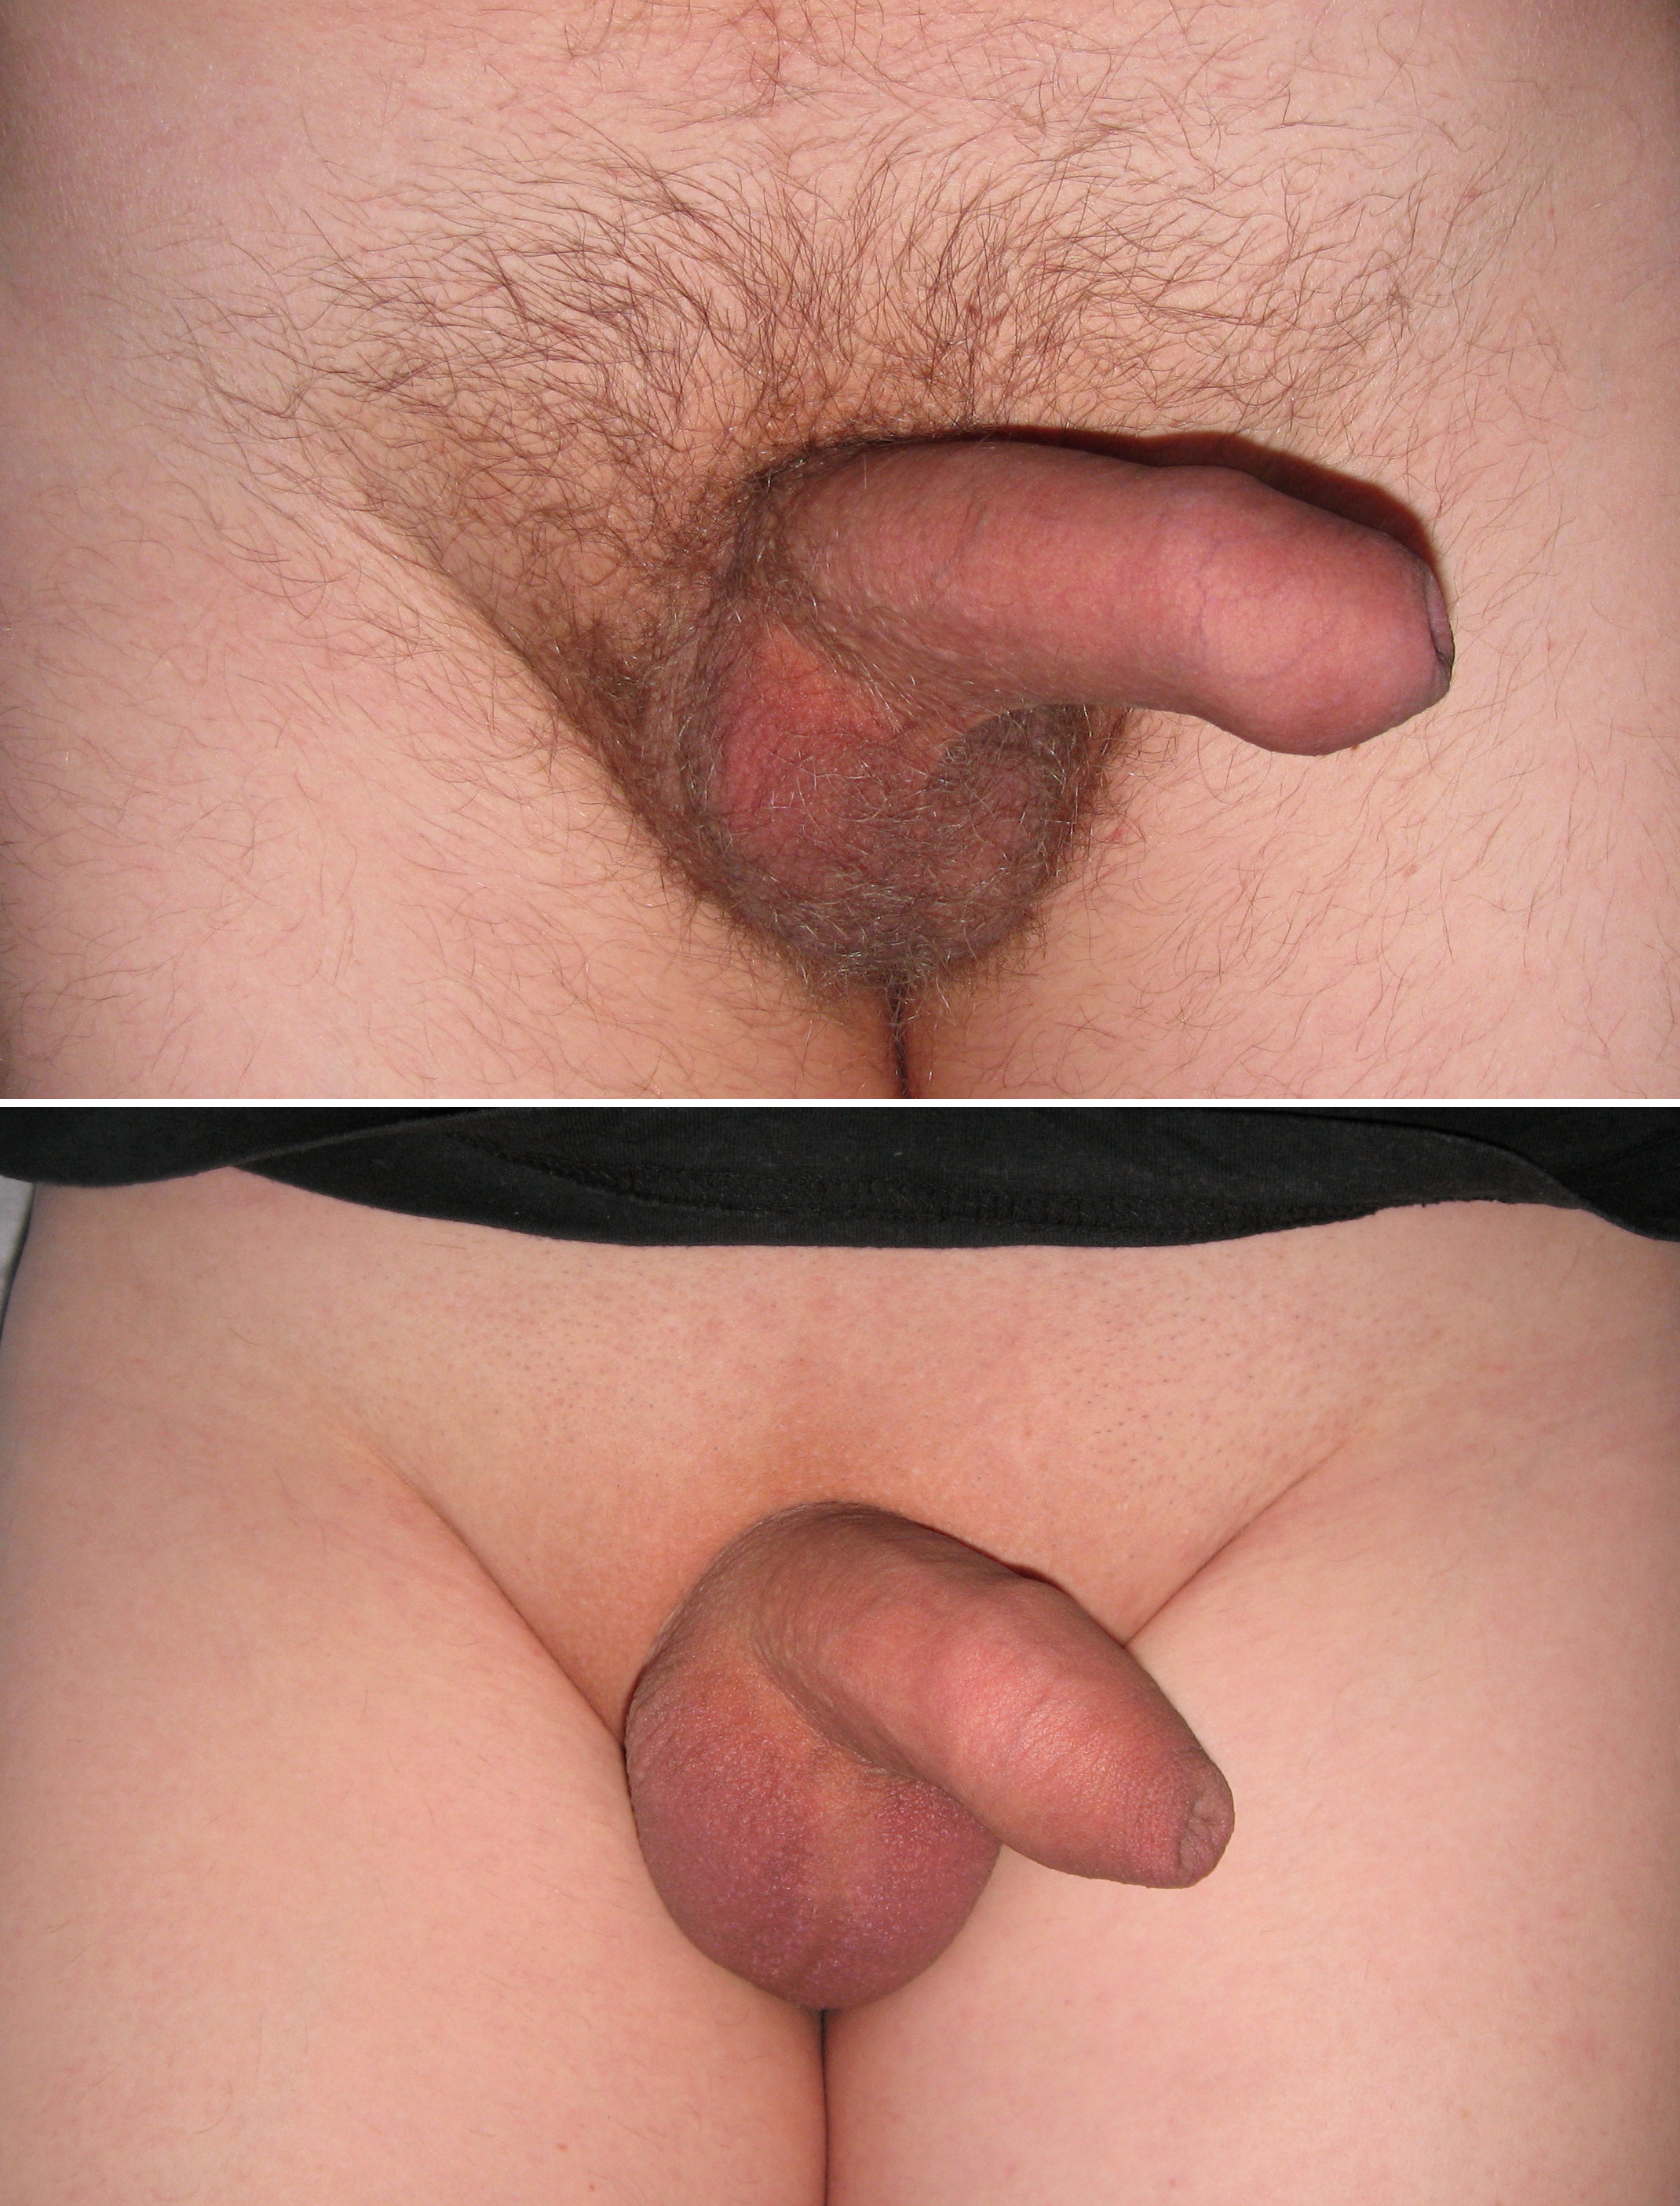 Shaved or unshaved vaginas